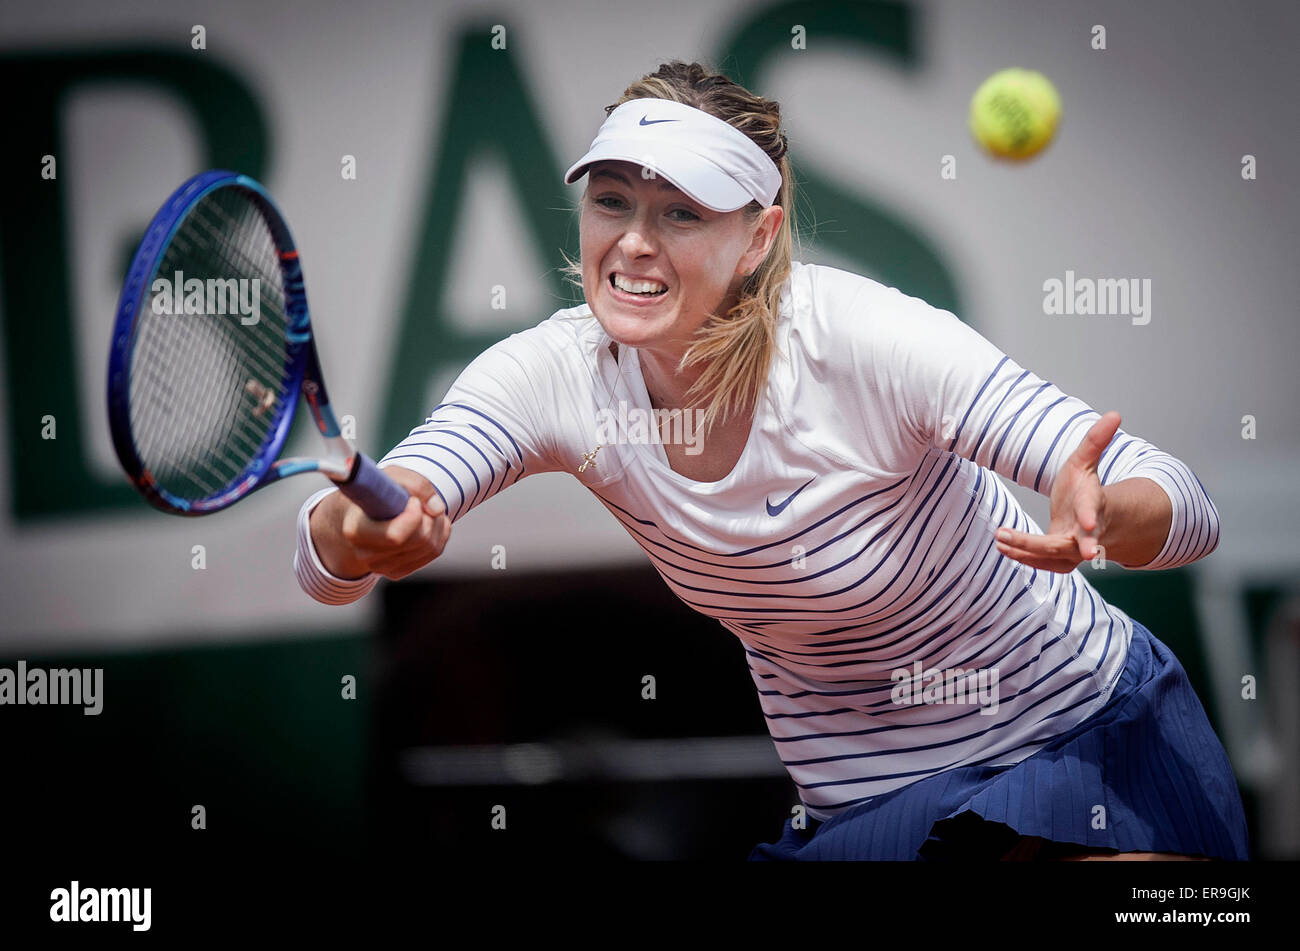 Paris, France. 29th May, 2015. Maria Sharapova of Russia hits a return during the women's singles 3rd round match against Samantha Stosur of Australia at the 2015 French Open tennis tournament in Paris, France, on May 29, 2015. Maria Sharapova won 2-0. Credit:  Chen Xiaowei/Xinhua/Alamy Live News Stock Photo